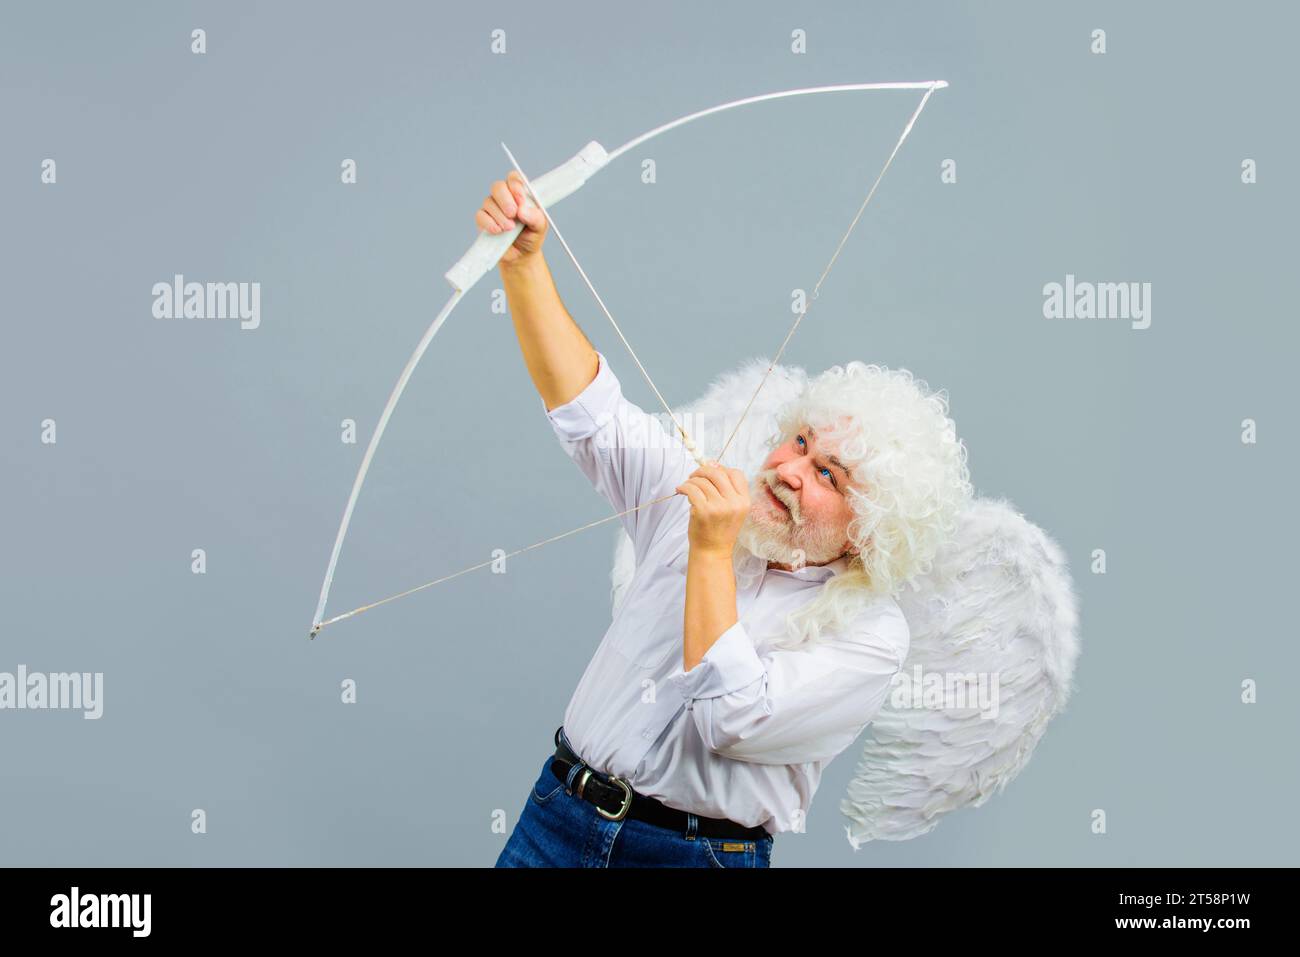 Valentines Day celebration. Arrow of love. Smiling man in white wings and wig shooting love arrow. Valentine angel with white wings shoots love arrow Stock Photo